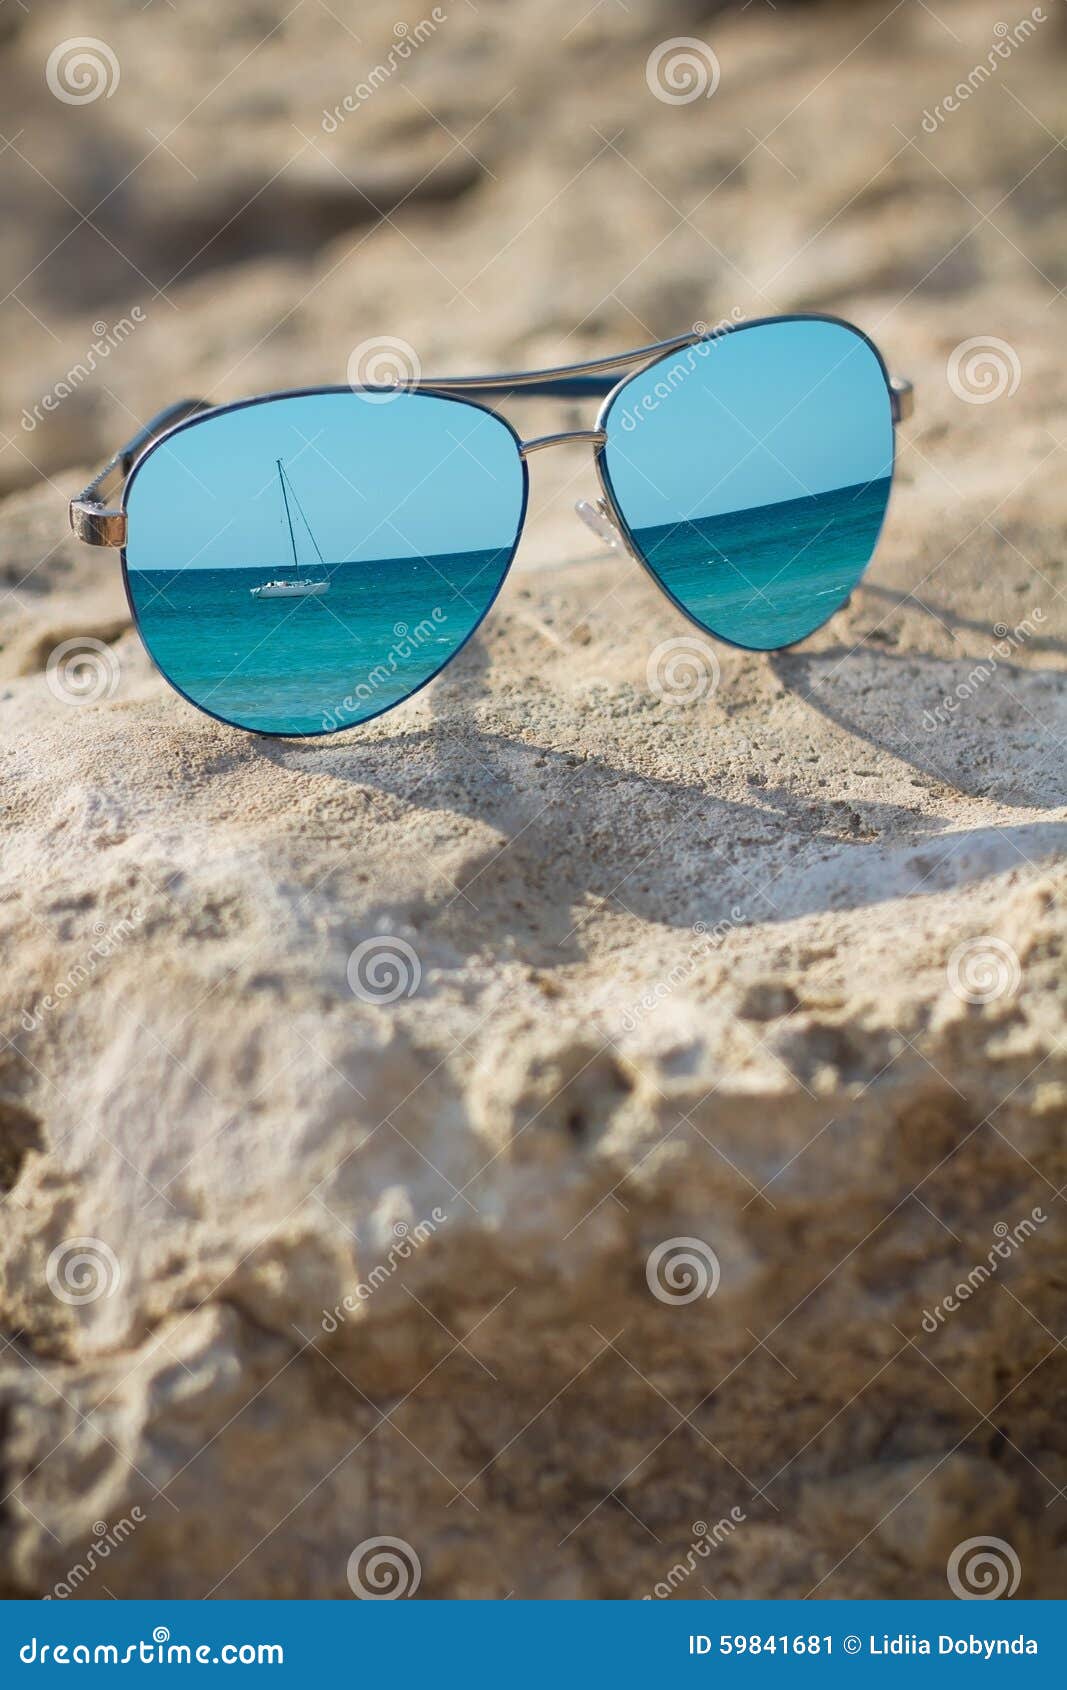 Blue Mirrored Sunglasses on the Beach Background Close Up Stock Image -  Image of reflection, background: 59841681